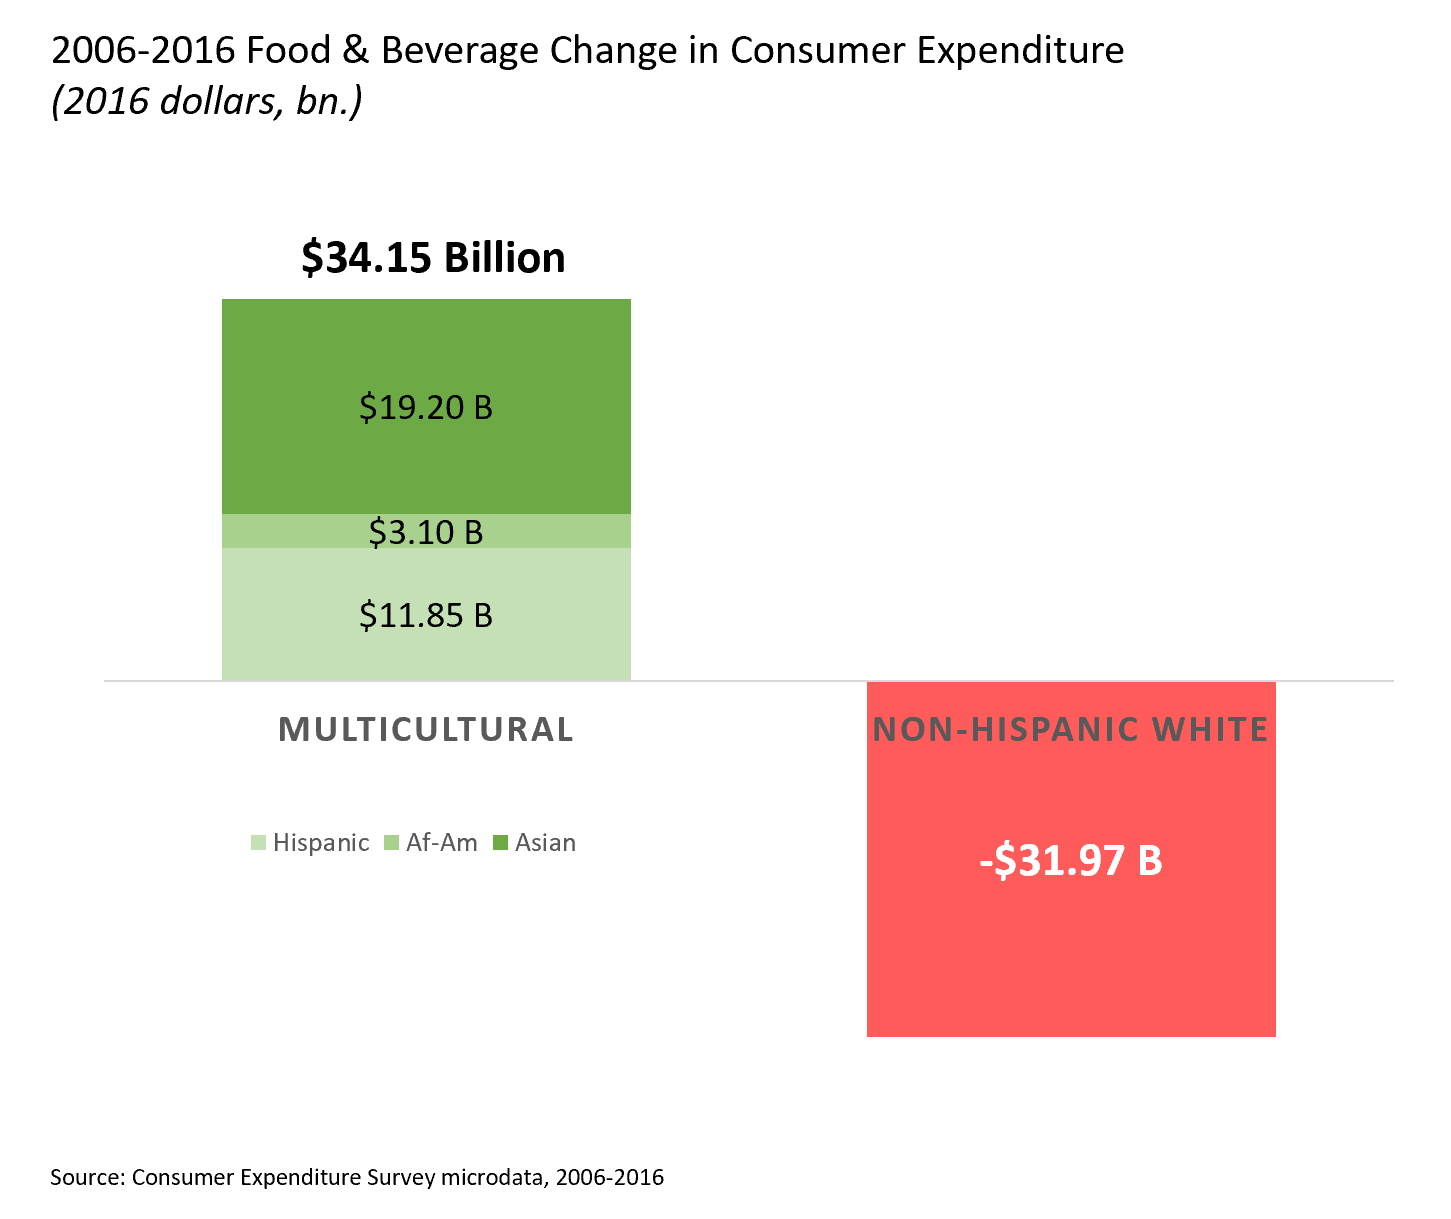 2006-2016 Food and Beverage Changes in Consumer Expenditures chart